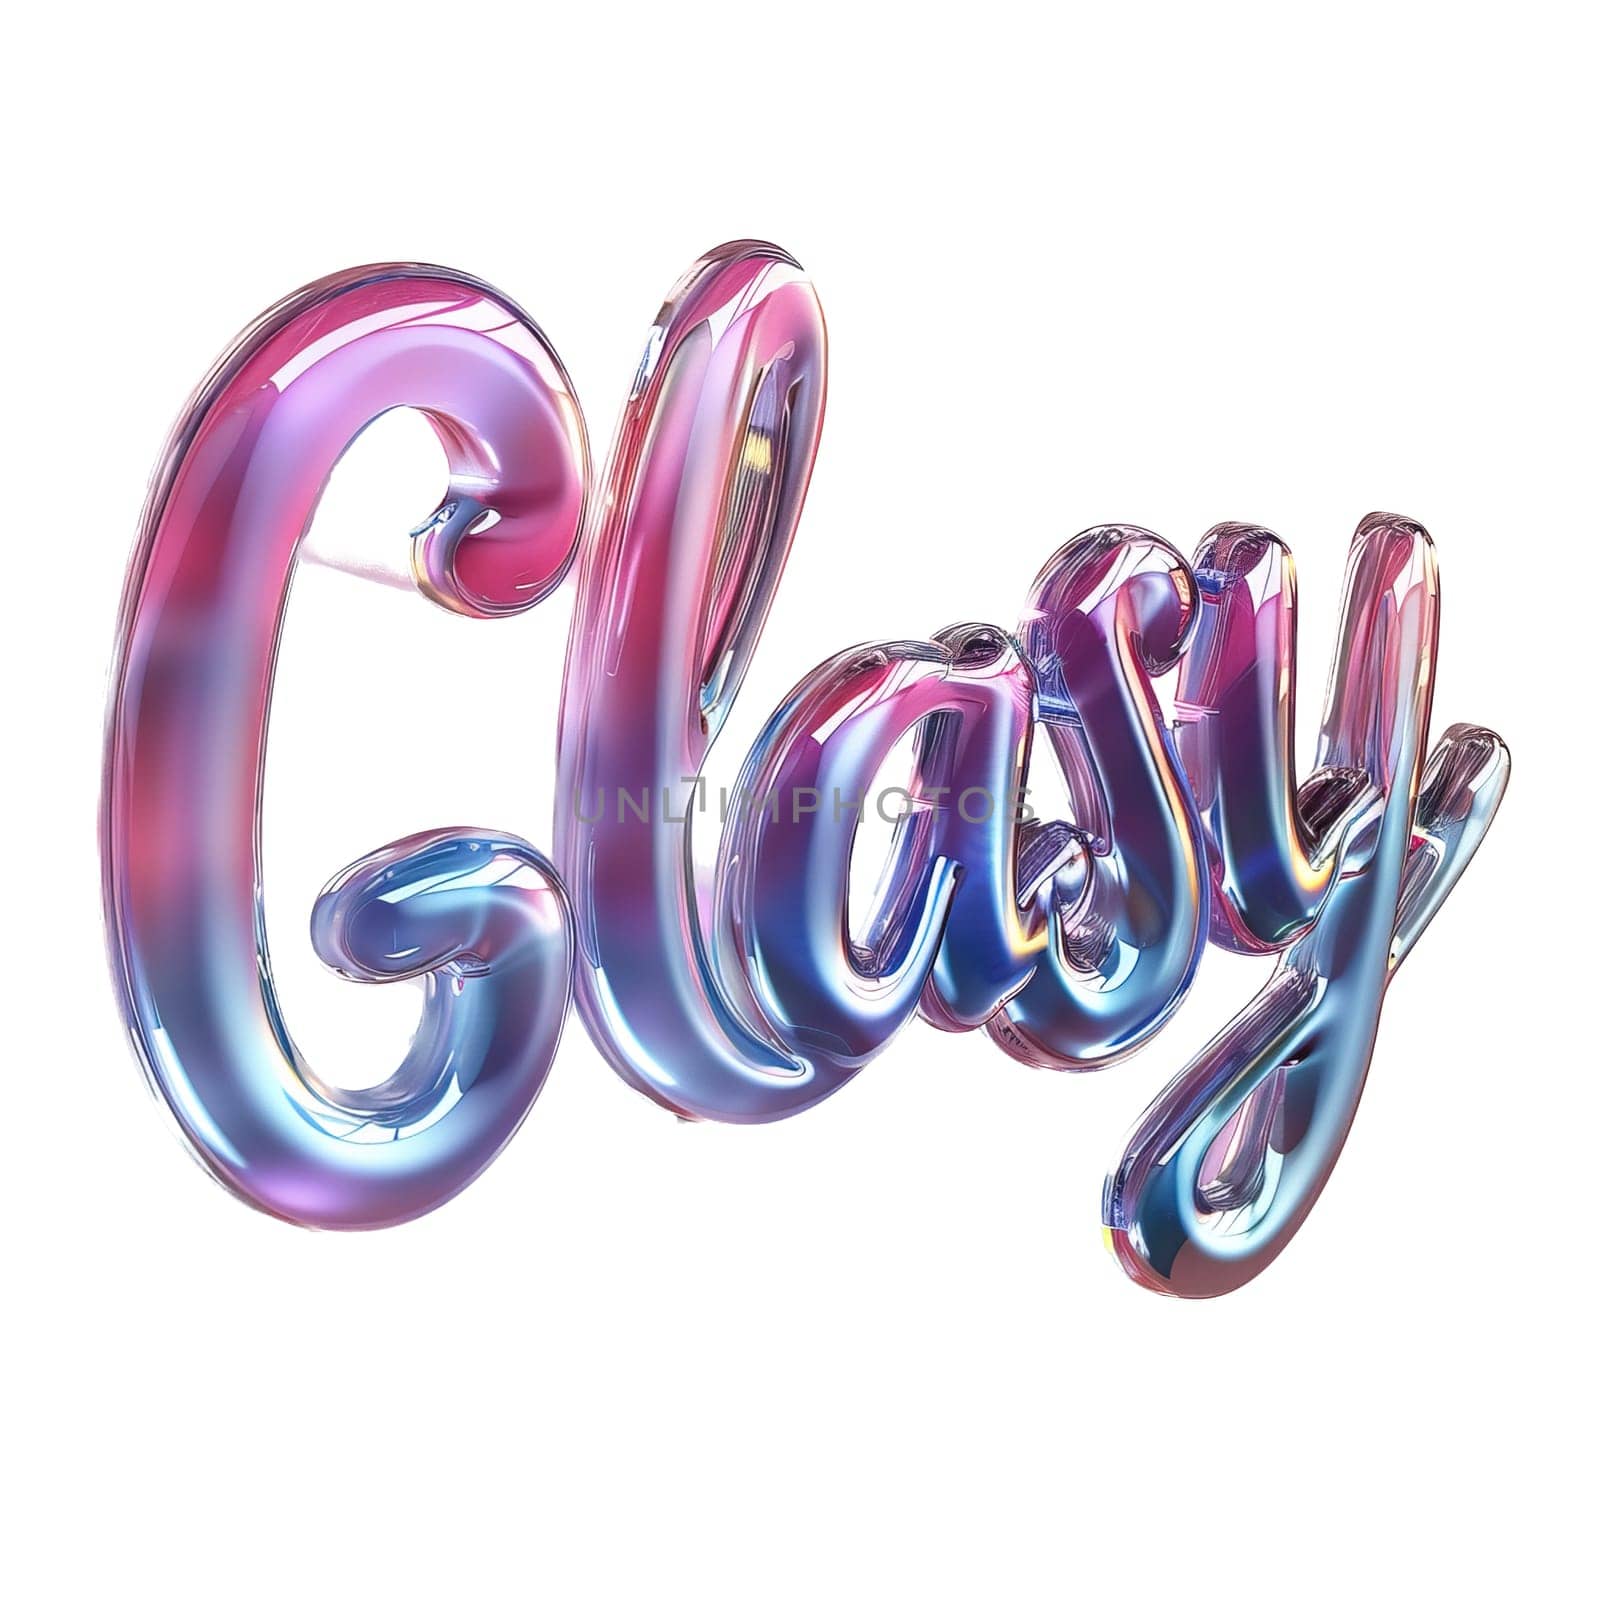 glassy pink and blue Glasy for logo in the style of neumorphism, soft natural lighting, simple and elegant space, close-up, super high detaill